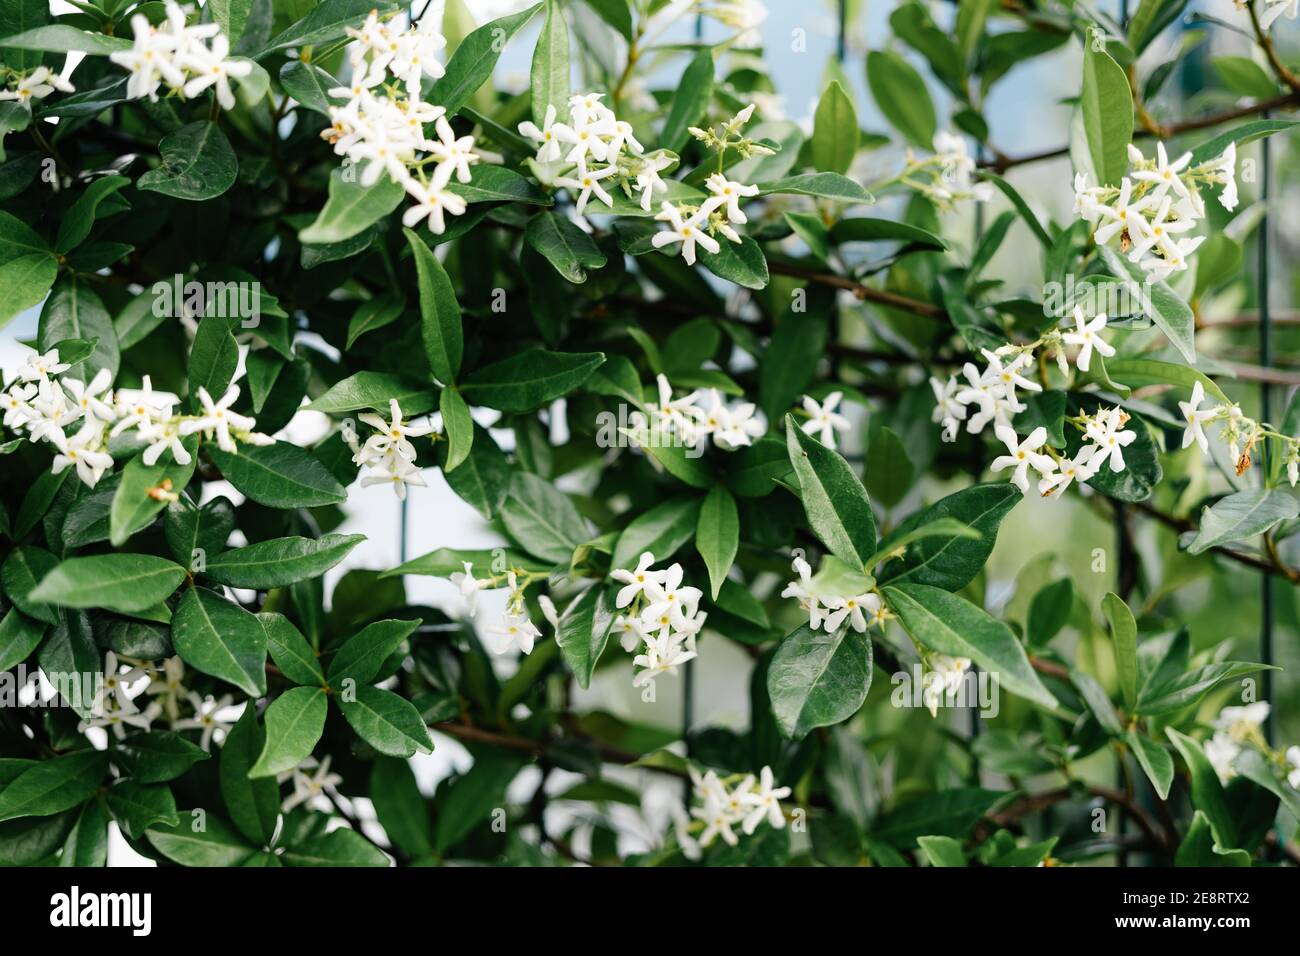 Close-up of jasmine leaves during flowering of small flowers near a metal lattice. Stock Photo